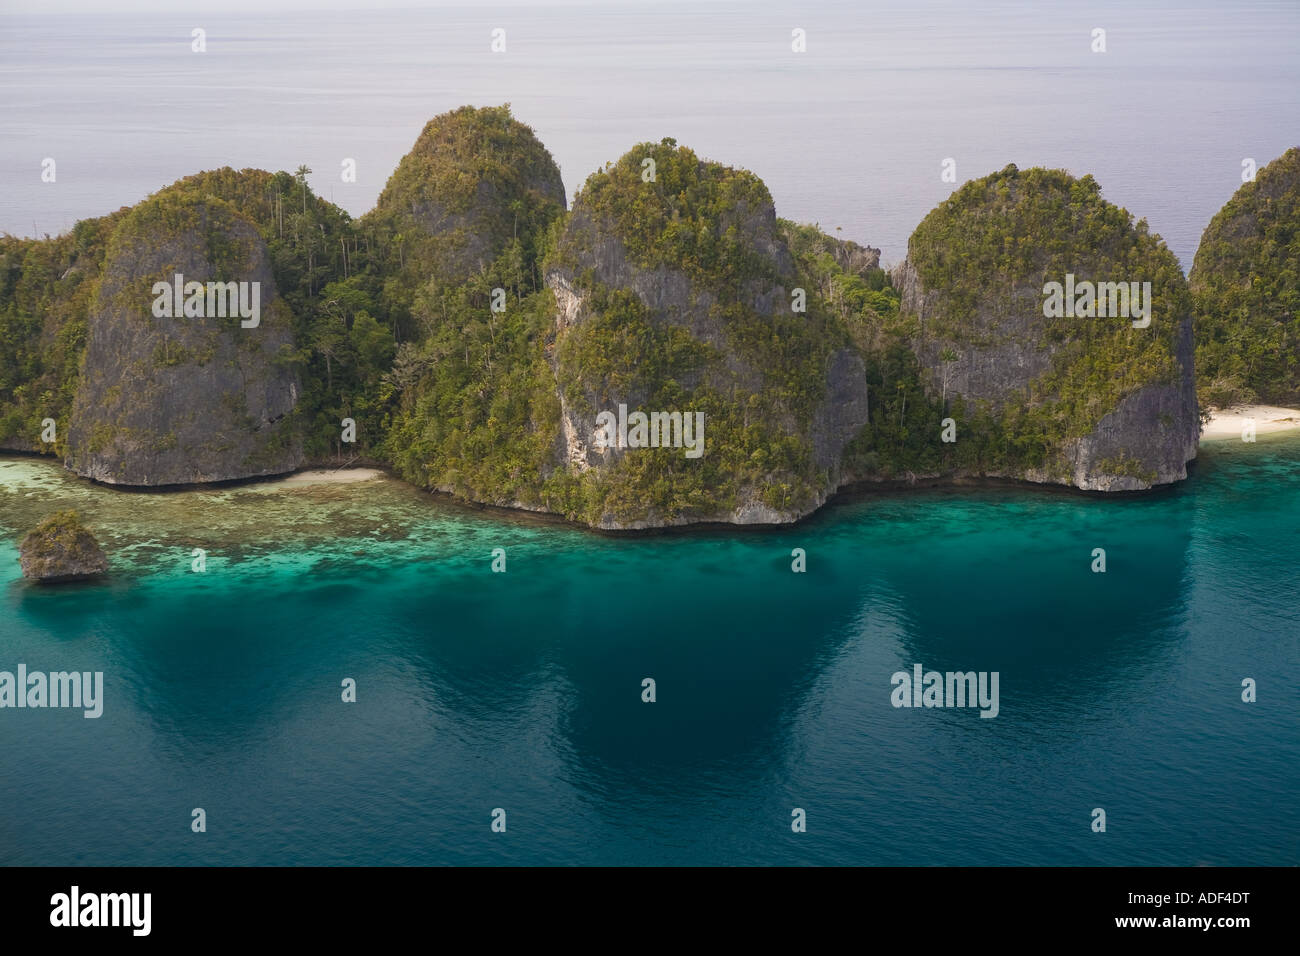 Limestone islands, once ancient reefs, are found in specific areas throughout the Indo-West Pacific region. This area is in Raja Ampat, Indonesia. Stock Photo